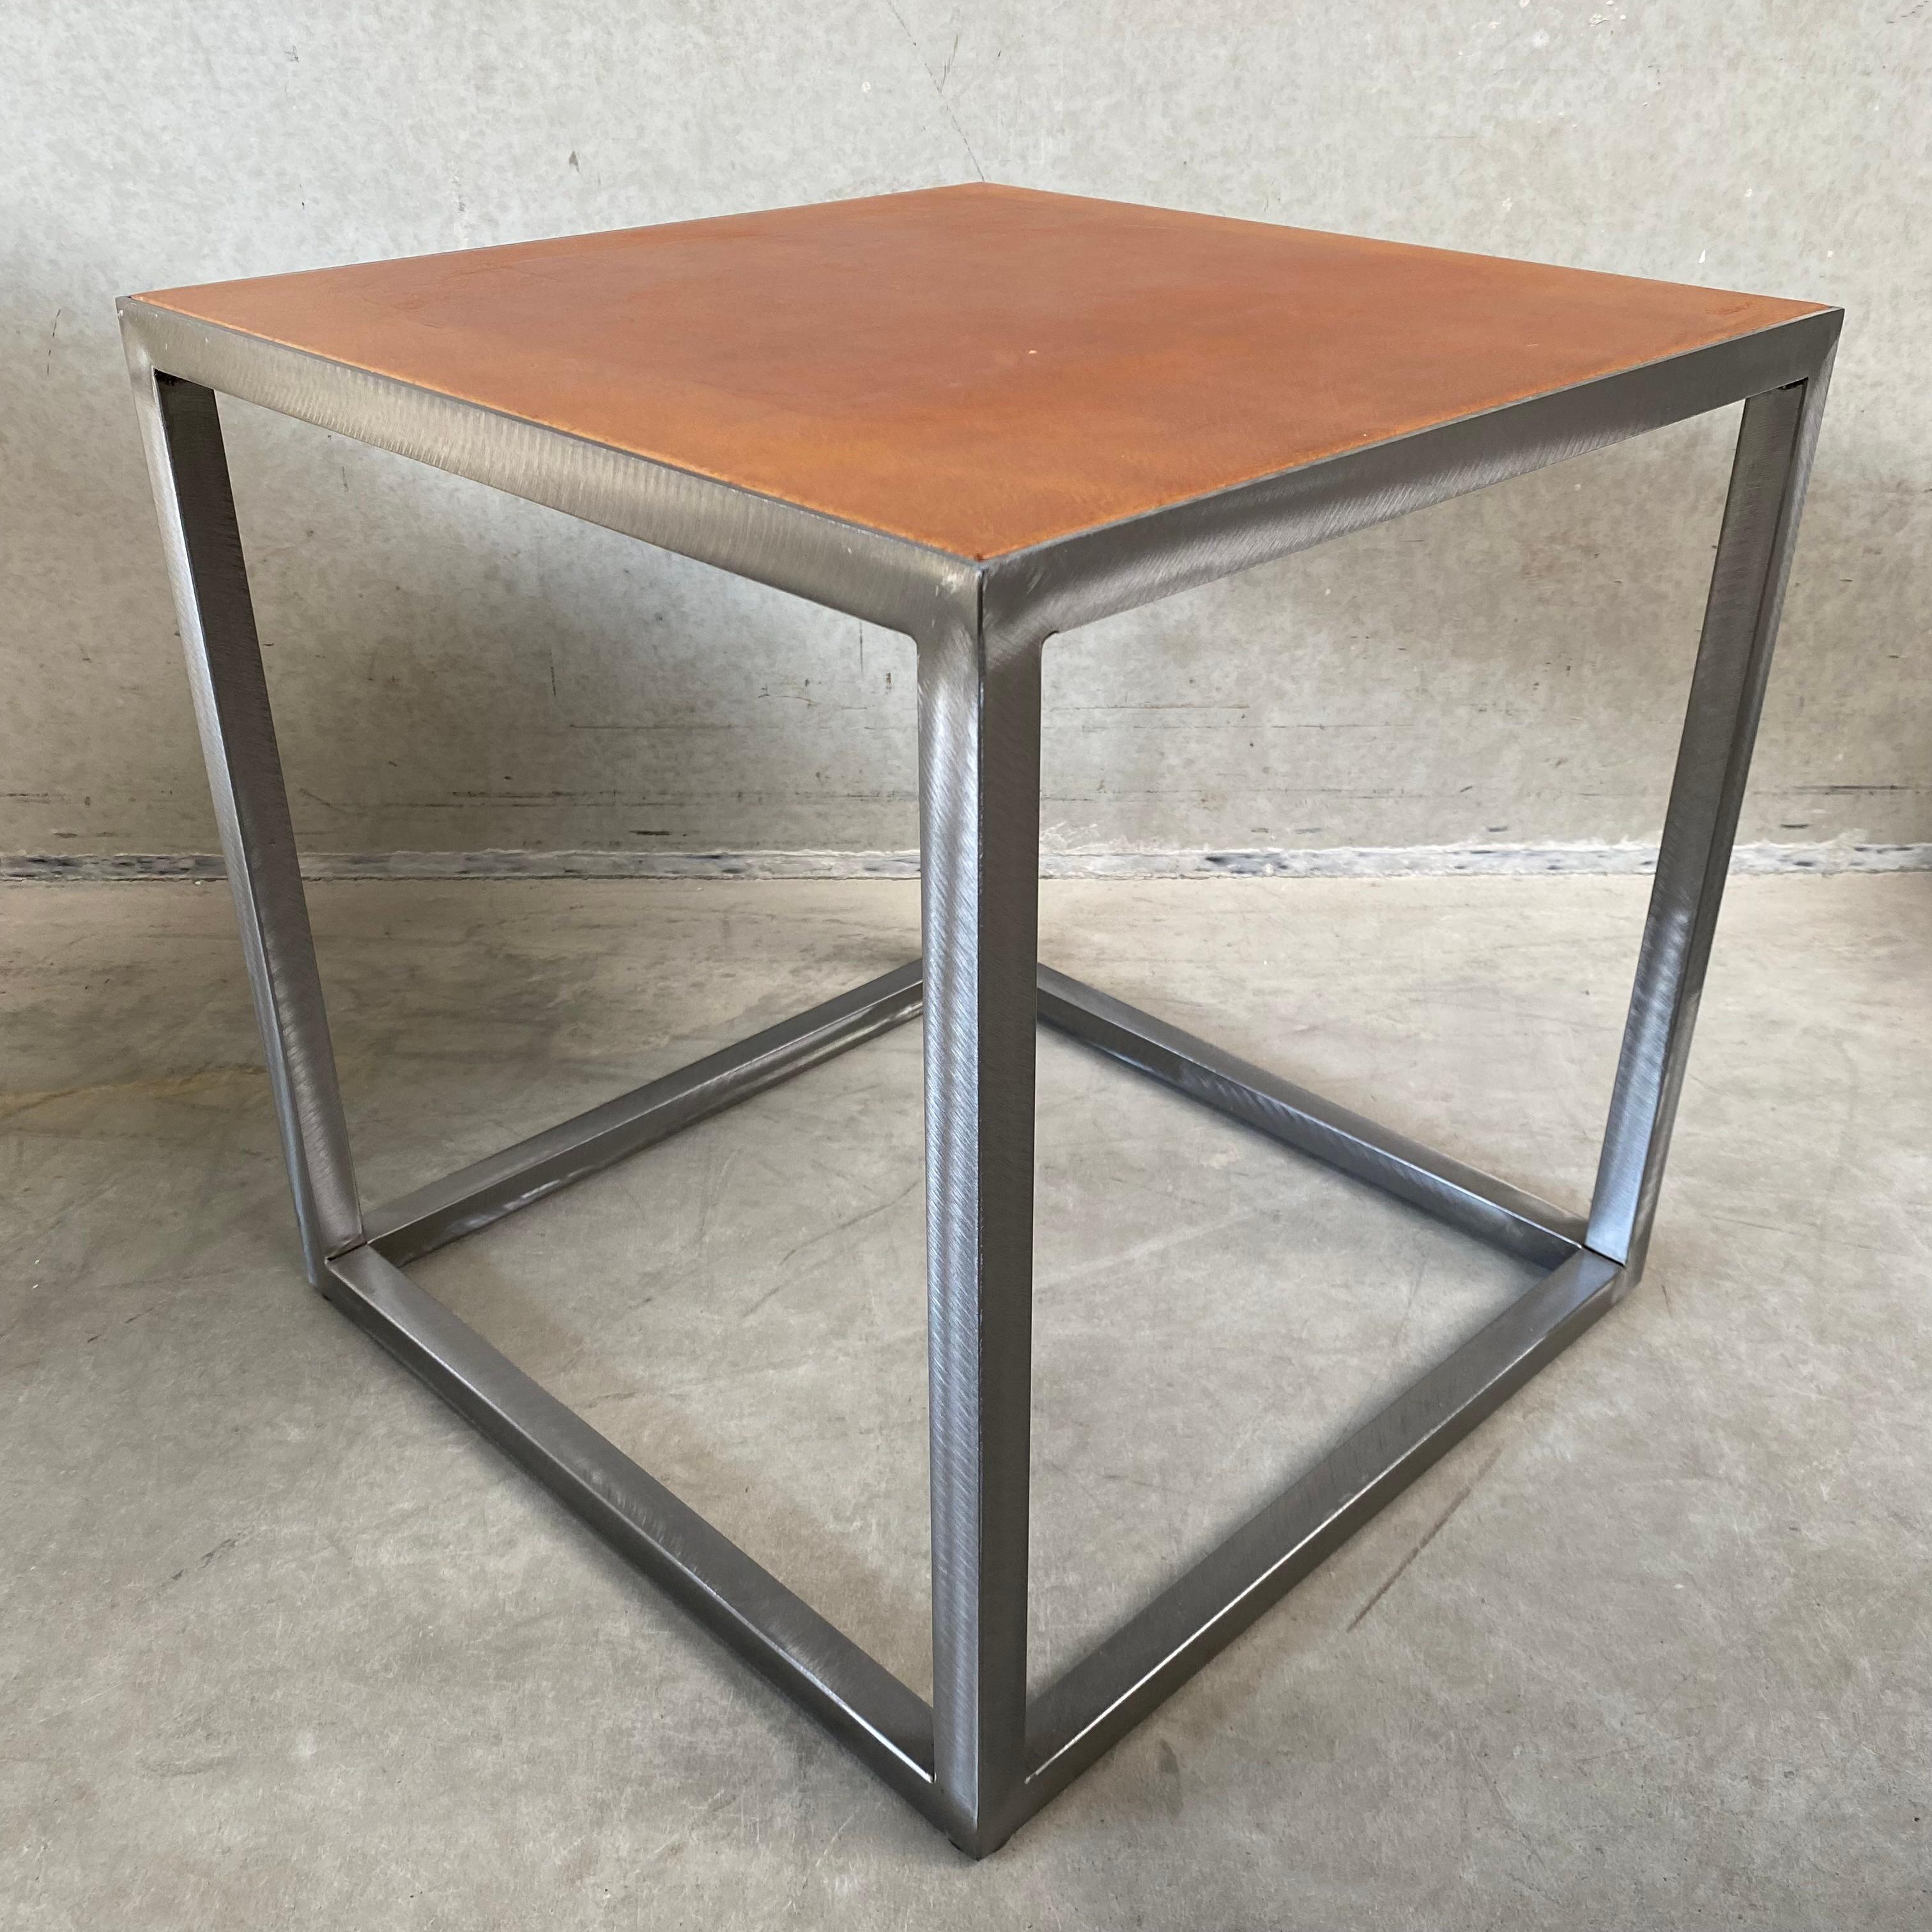 Modern Baxter Square Cognac Brown Leather Coffee Table Side Table 